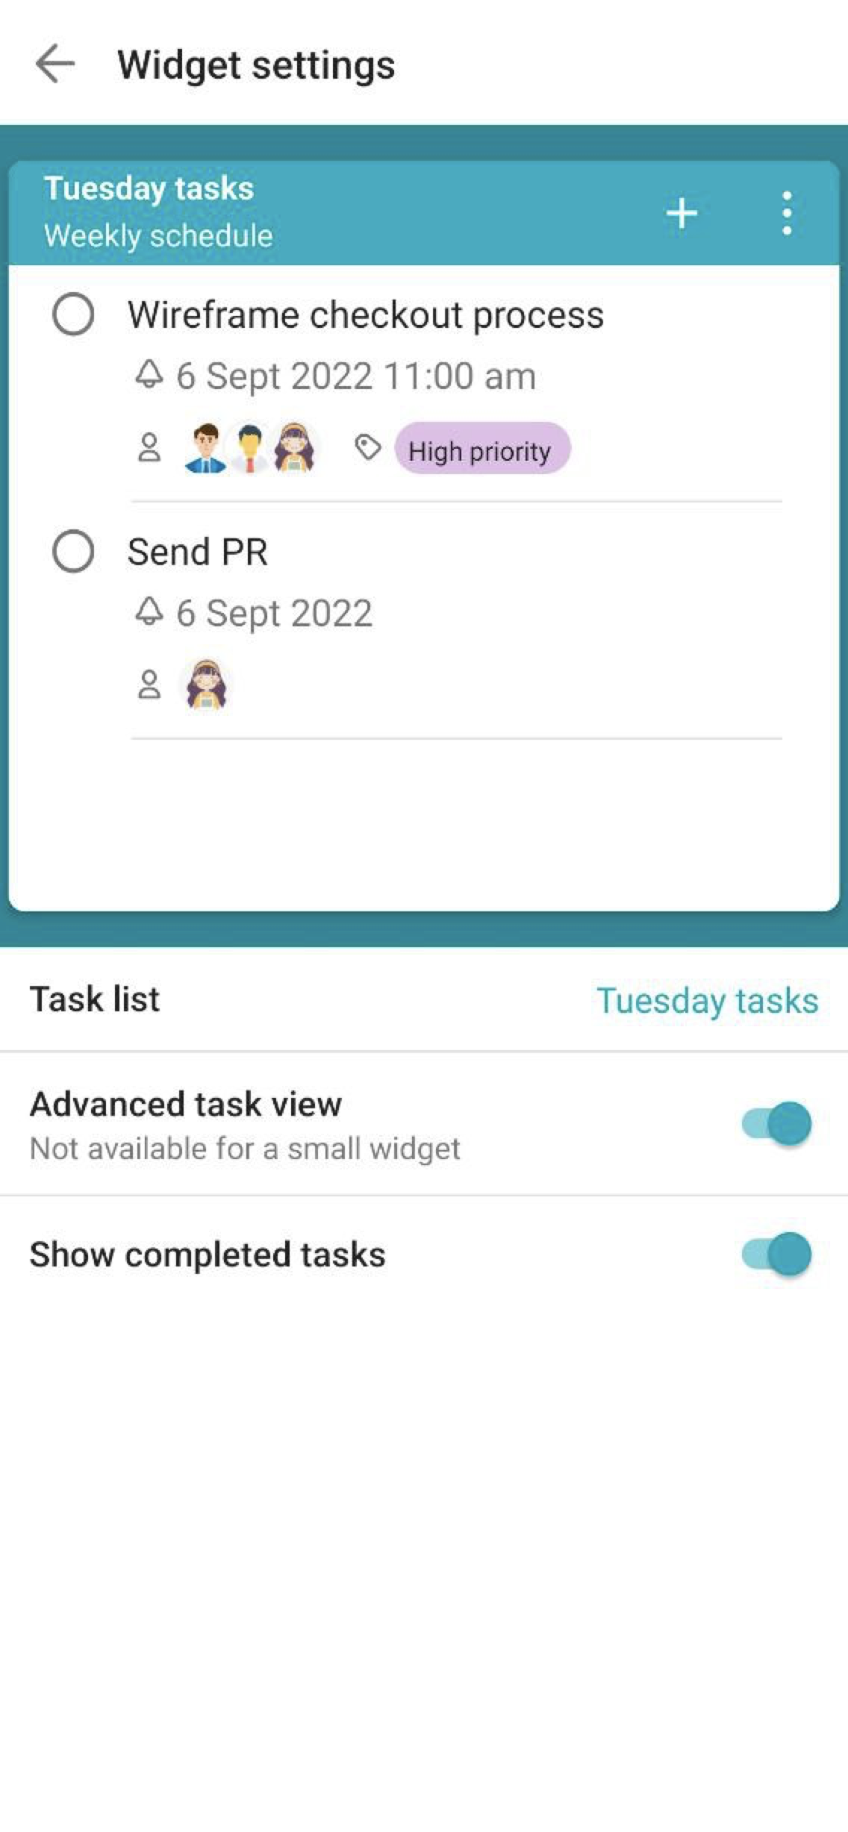 For this widget, you can configure the displaying of additional task options (Due date, Assignees, Labels) and hide or display completed tasks.